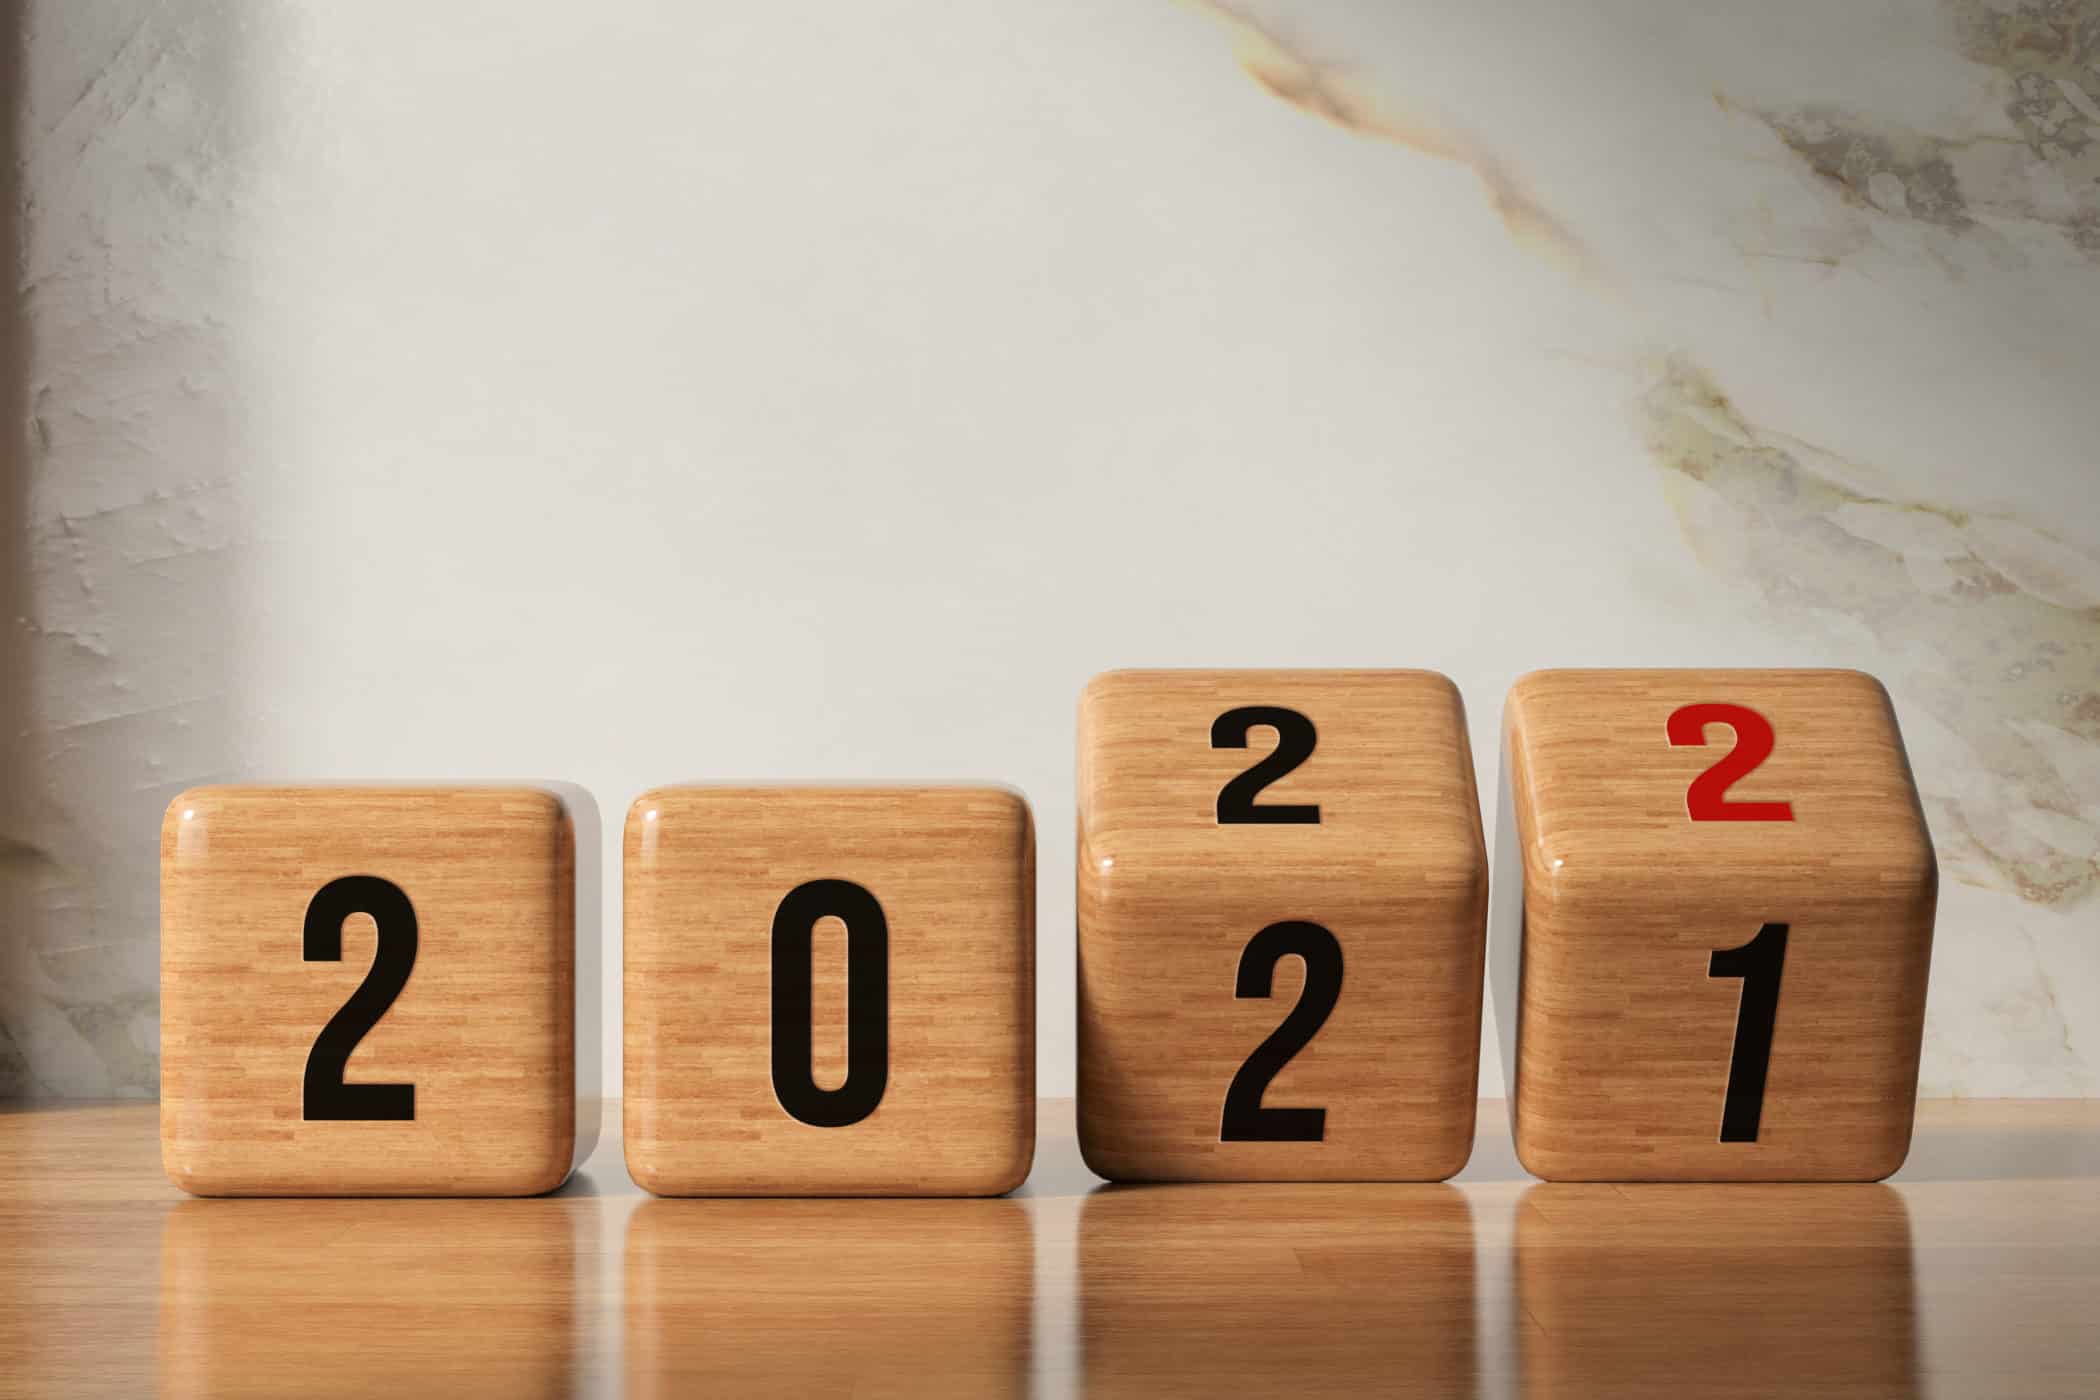 cube turns from 2021 to 2022 on wooden base